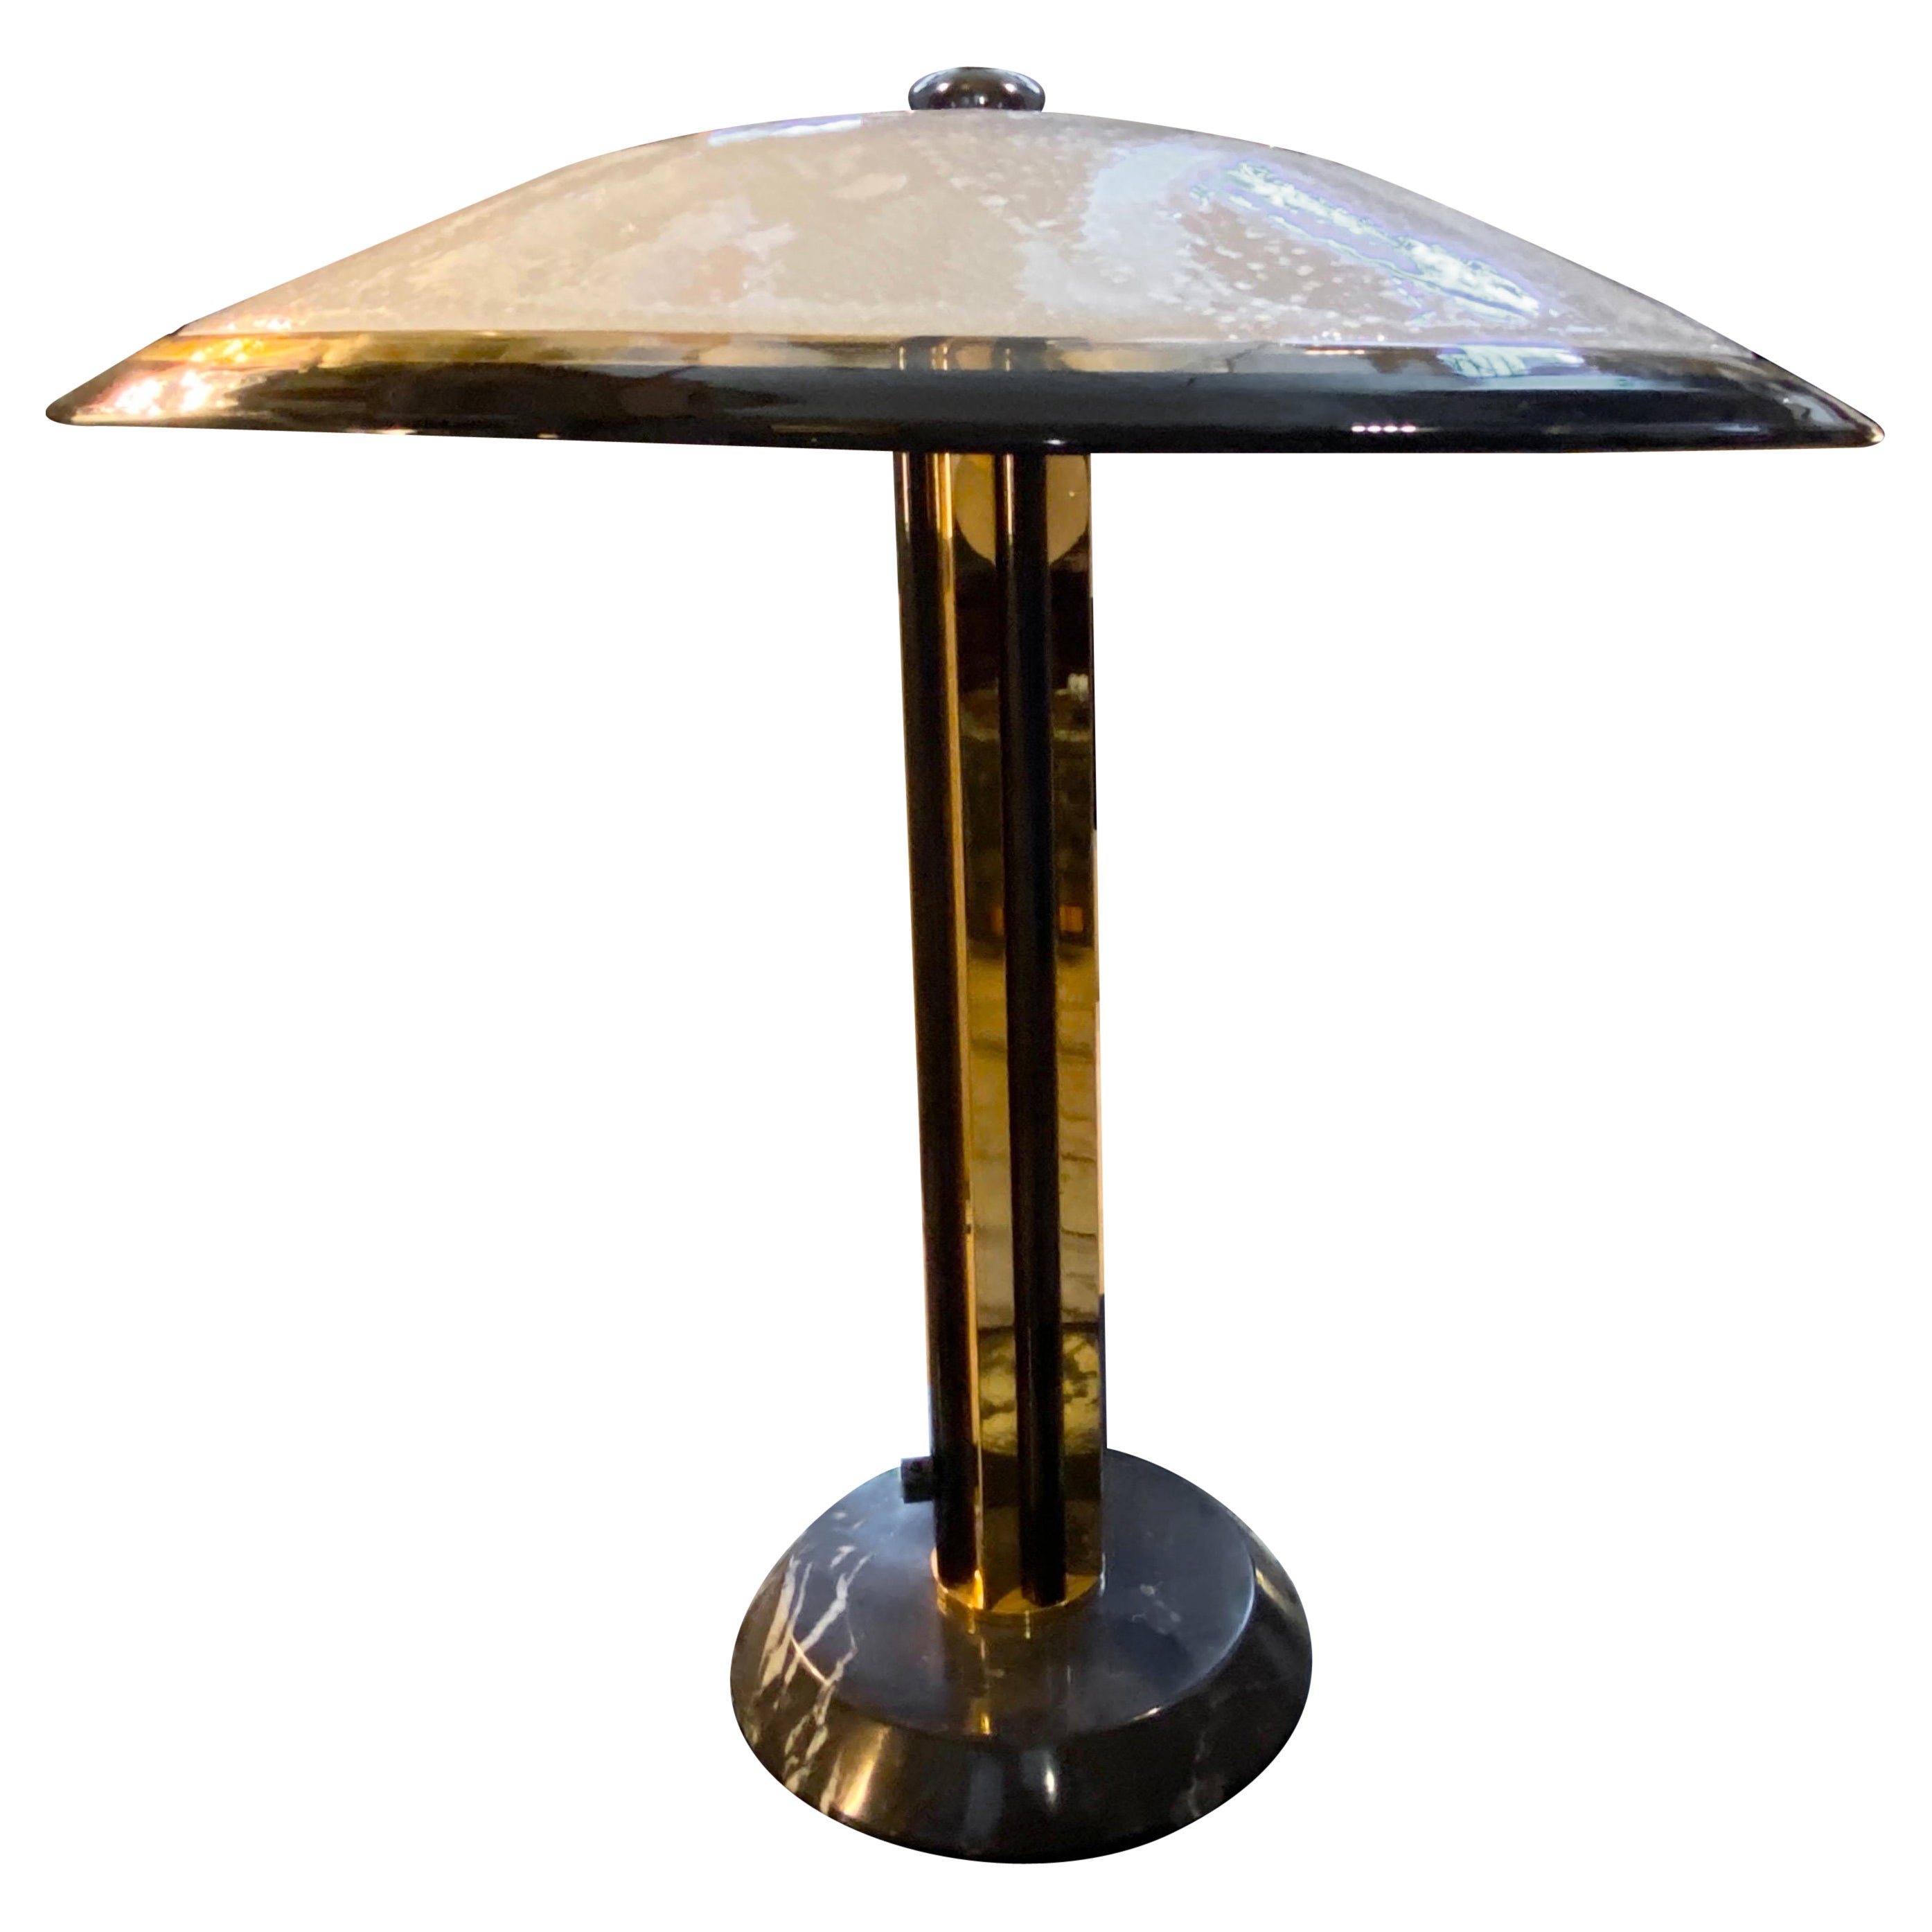 1970s Hollywood Regency High Quality Marble, Brass and Glass Italian Table Lamp For Sale